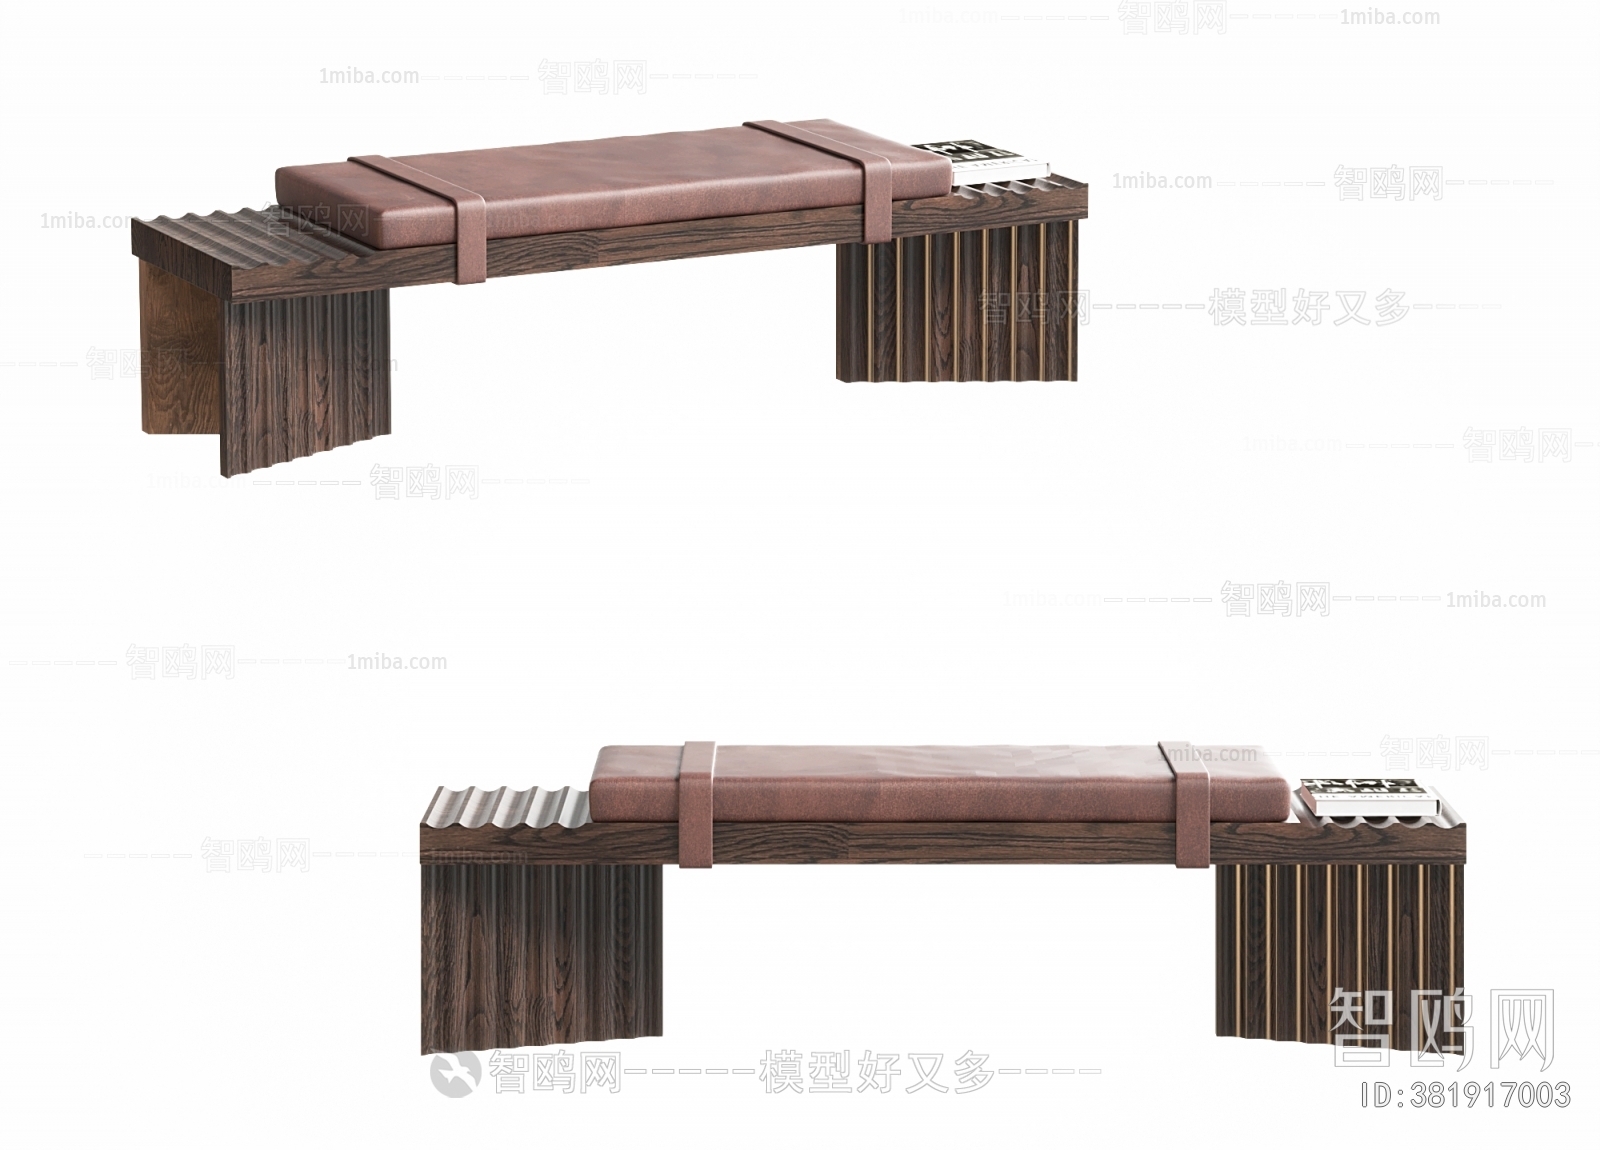 New Chinese Style Bench